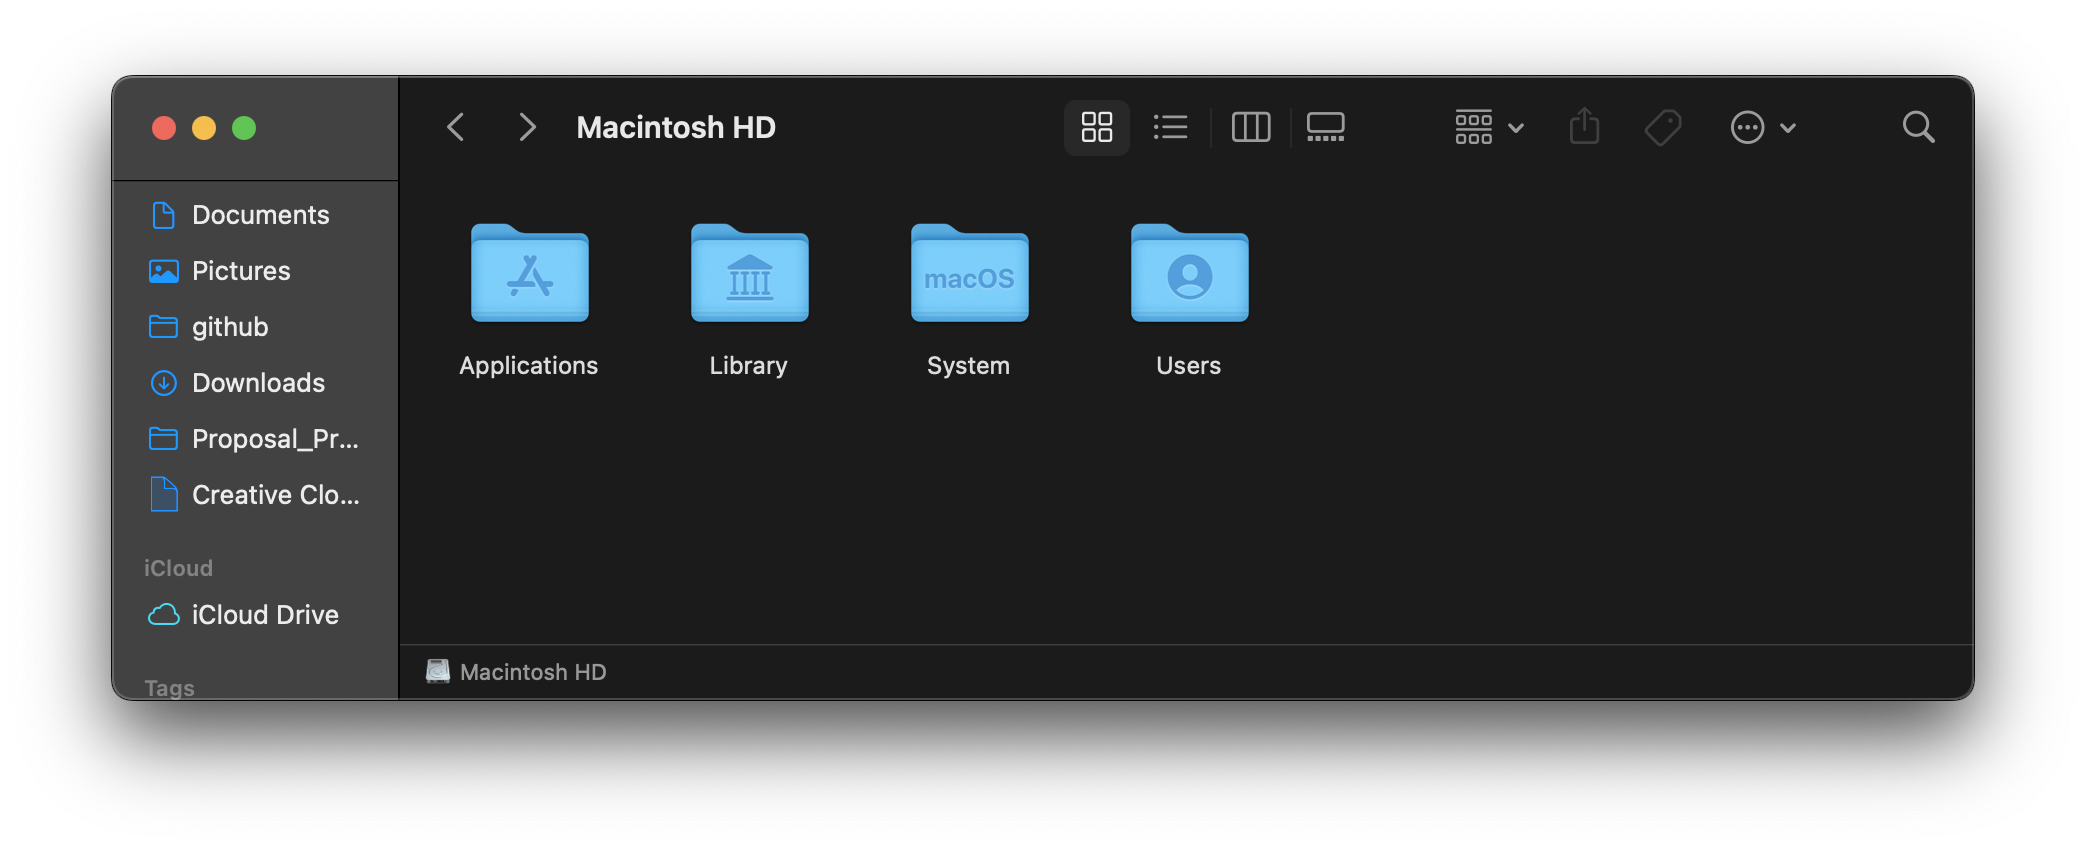 Macintosh HD Finder window showing icons listed above